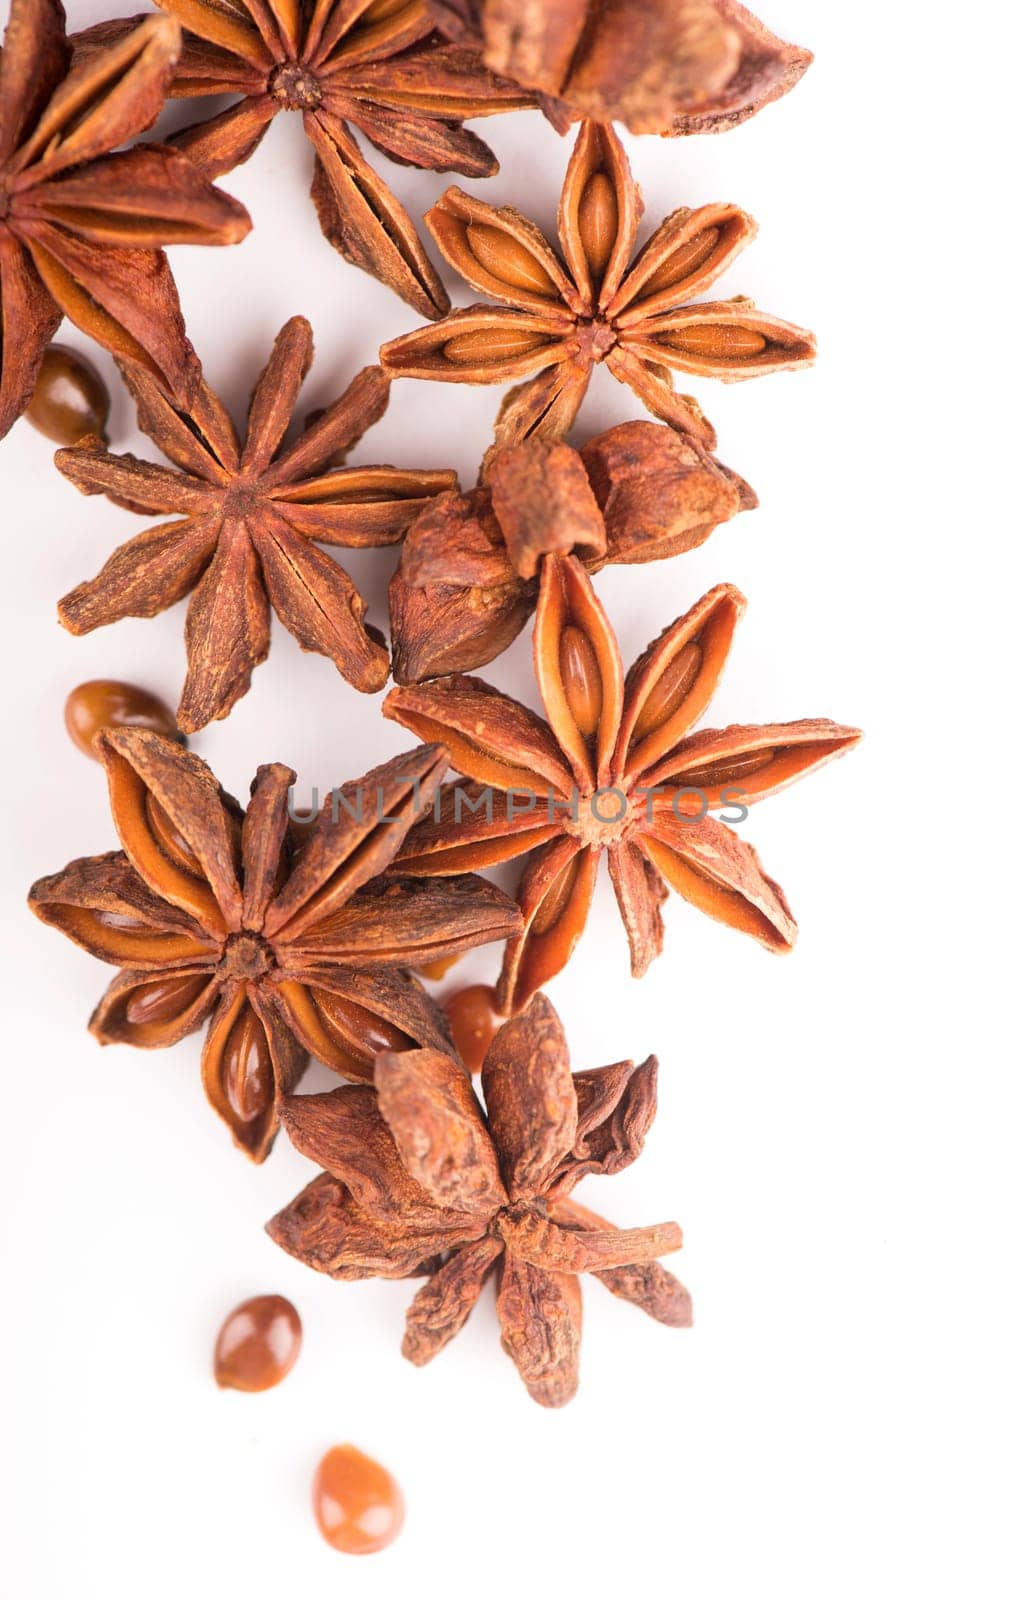 Whole Star Anise isolated on white background with shadow